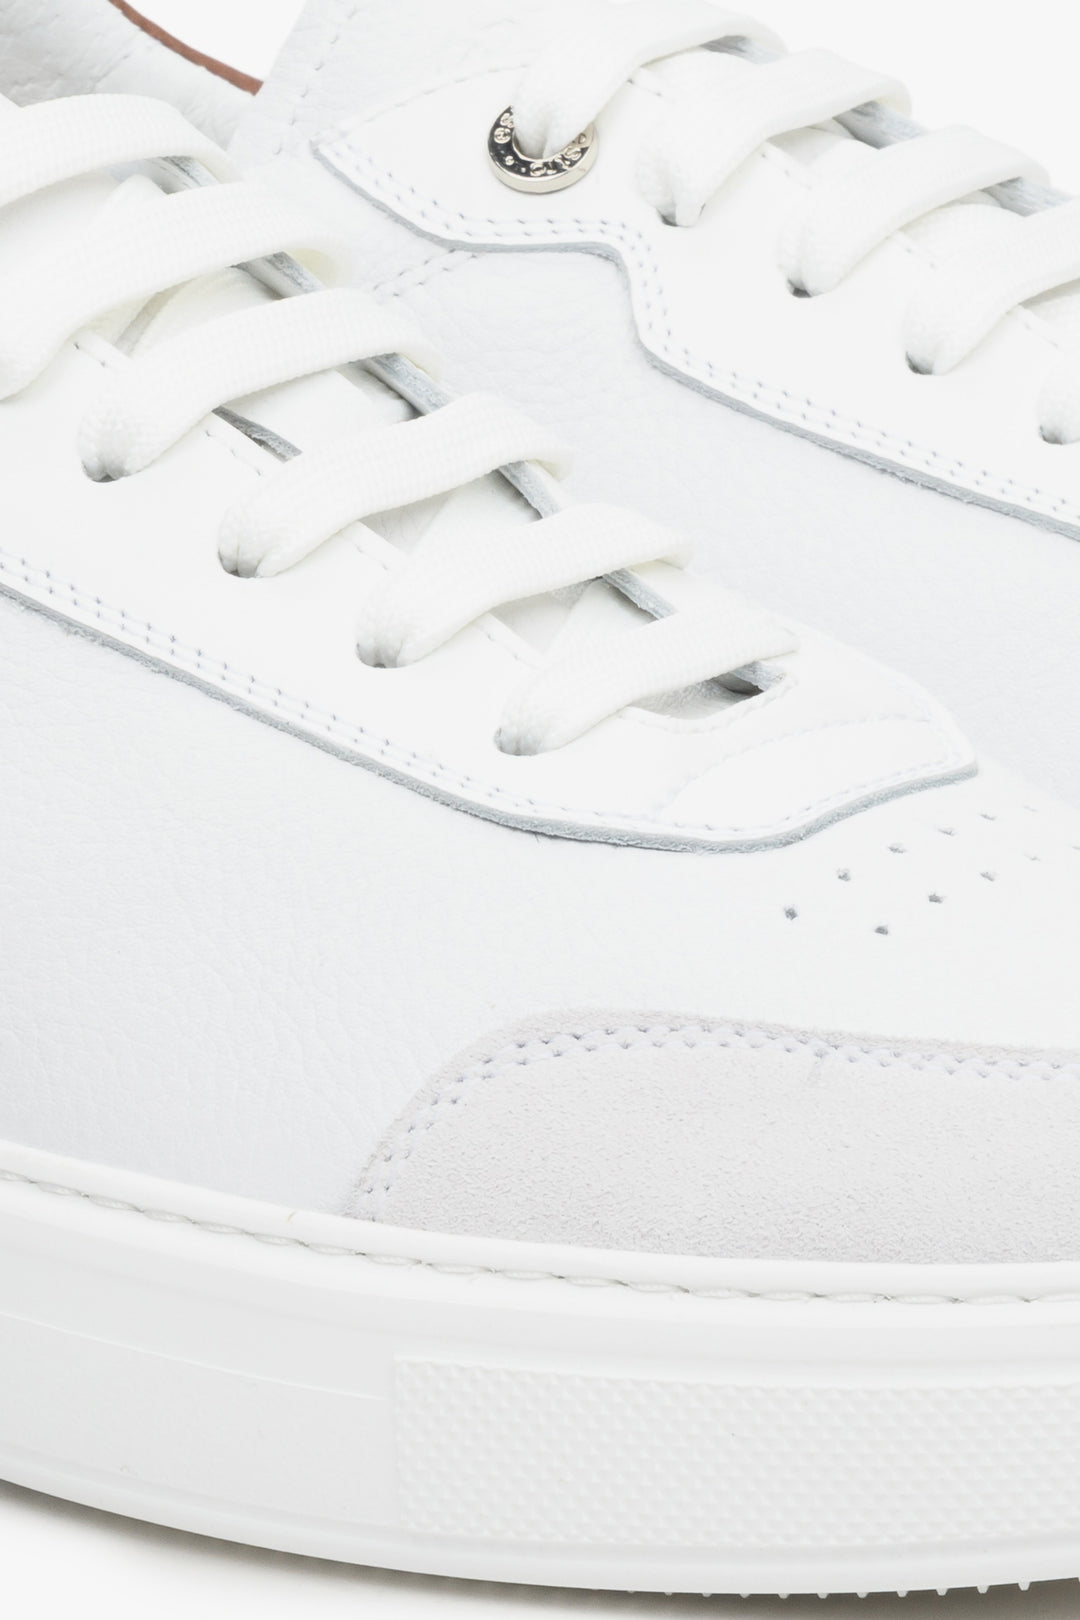 Men's leather and nubuck whote sneakers on an elastic sole - close up on details.